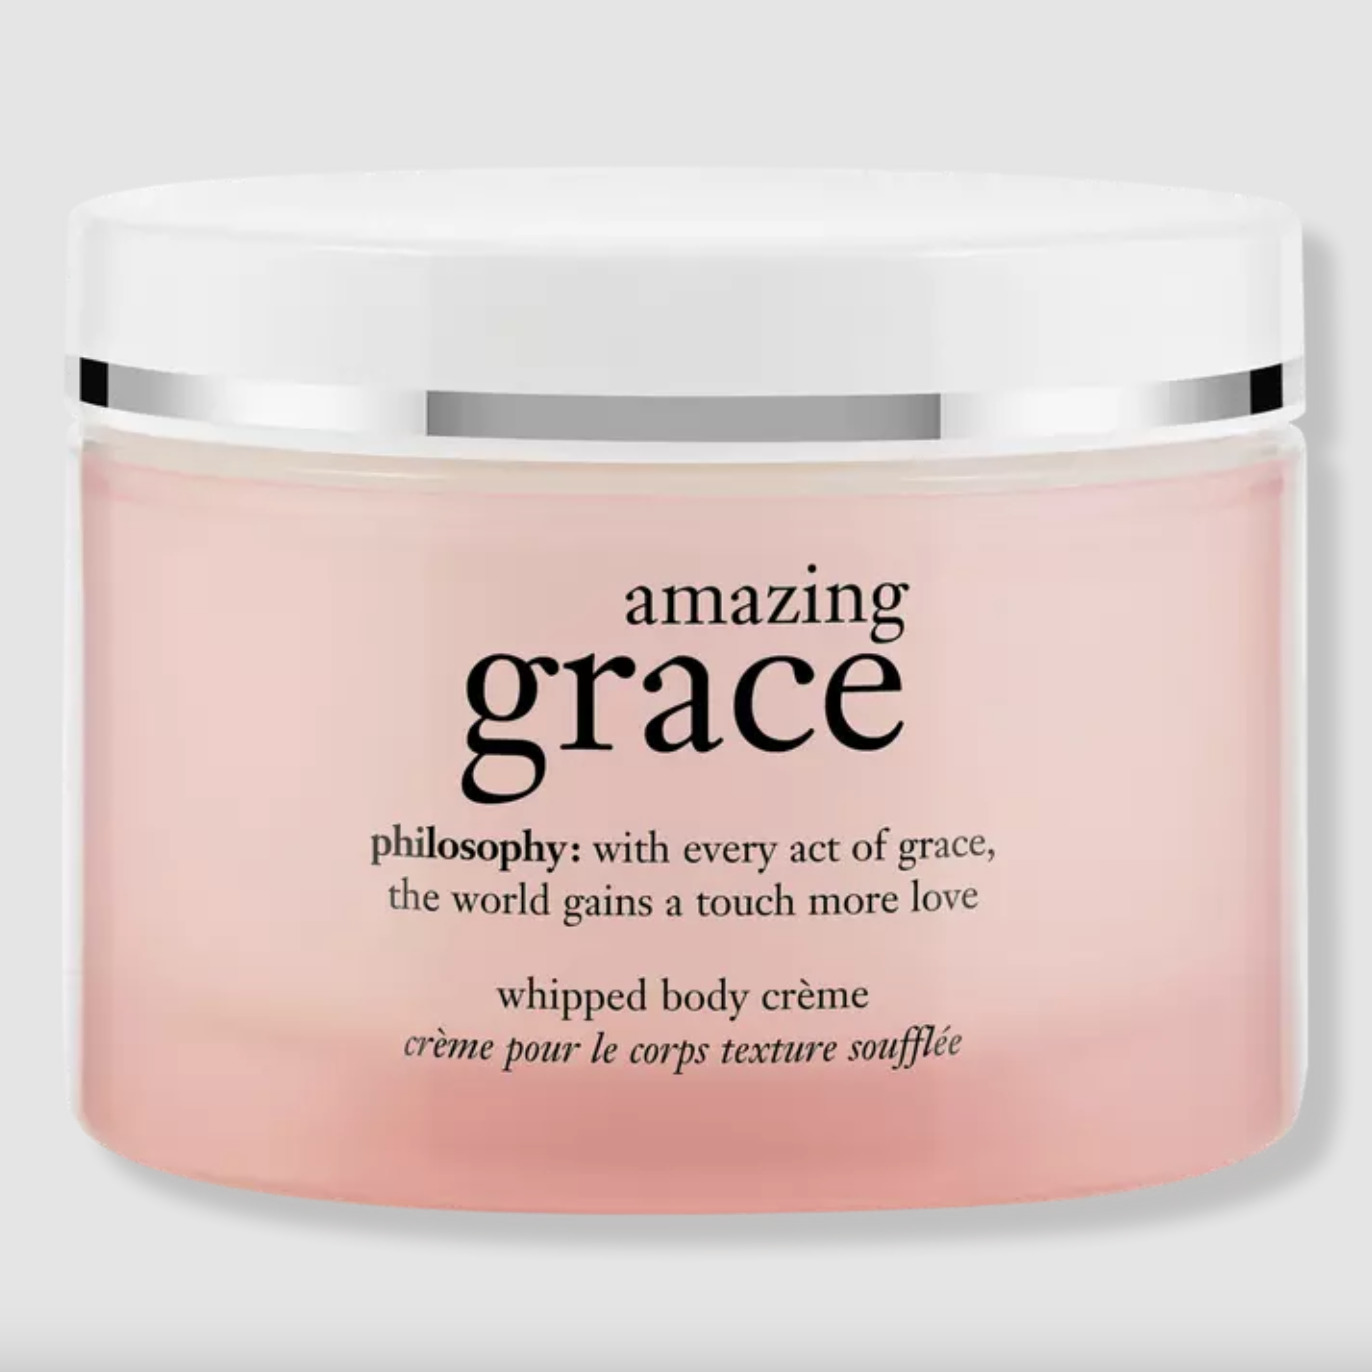 Amazing Grace whipped body creme for beauty lover